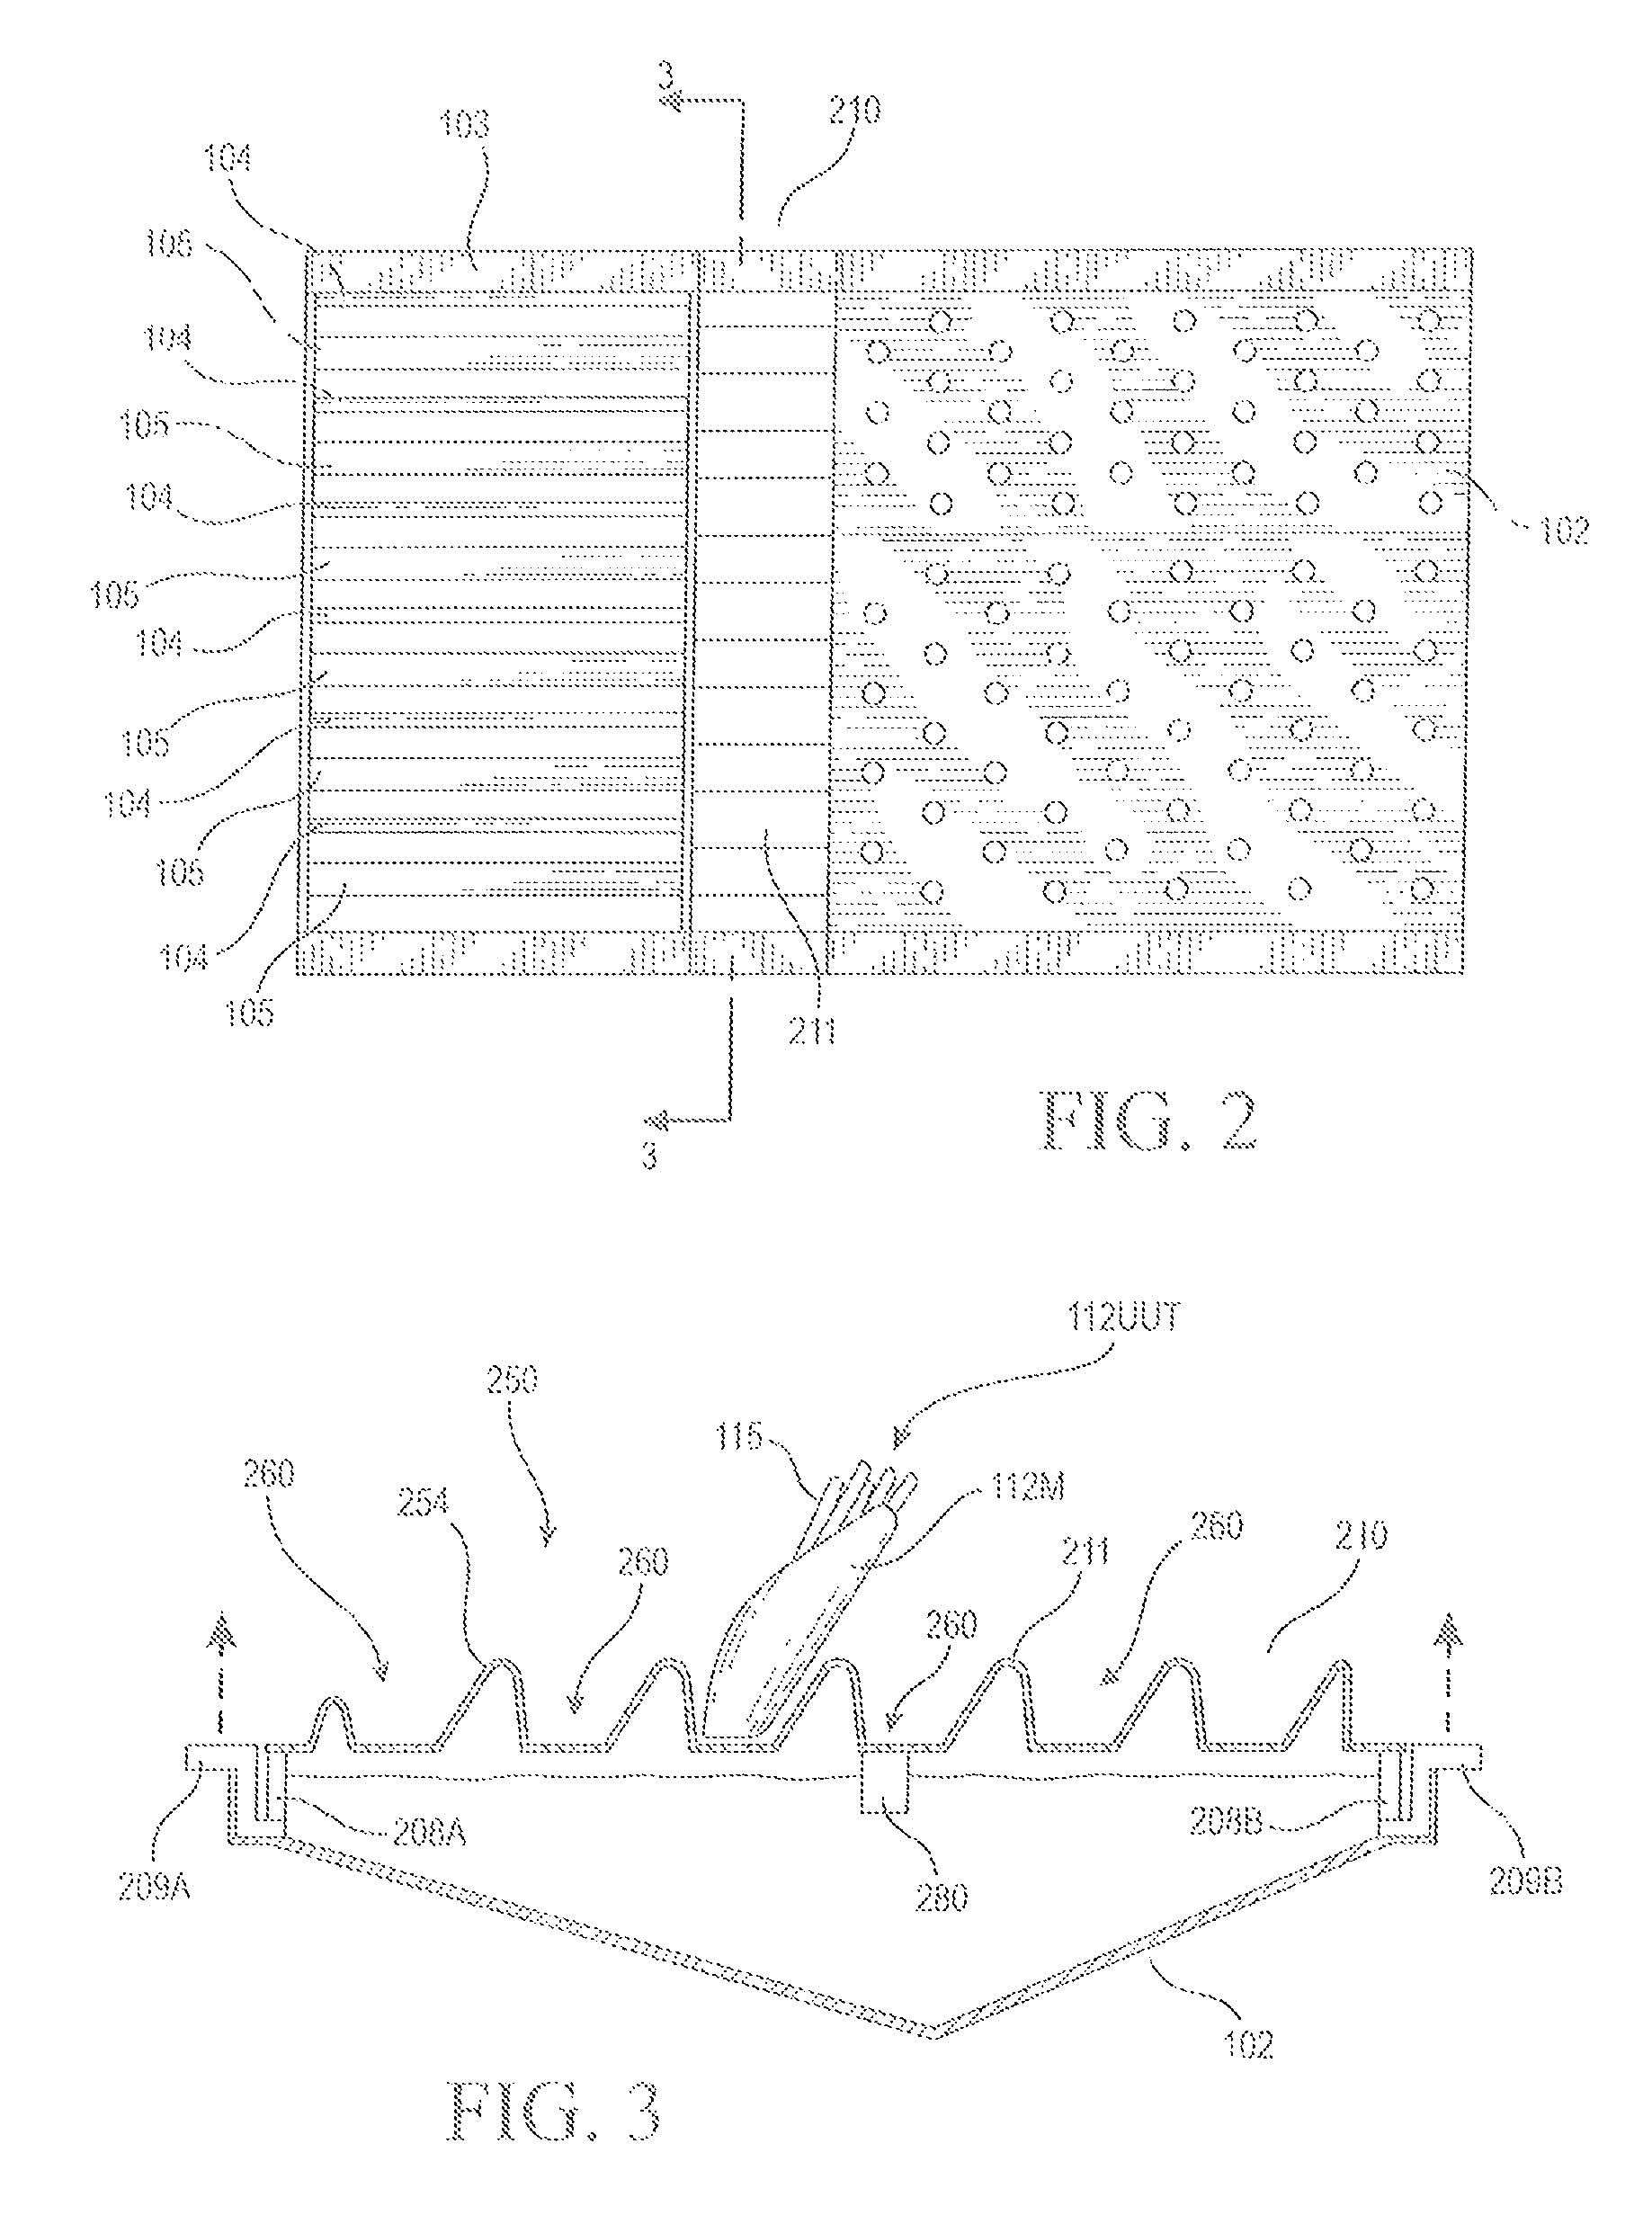 Fry station with integral portion weight sensing system and method